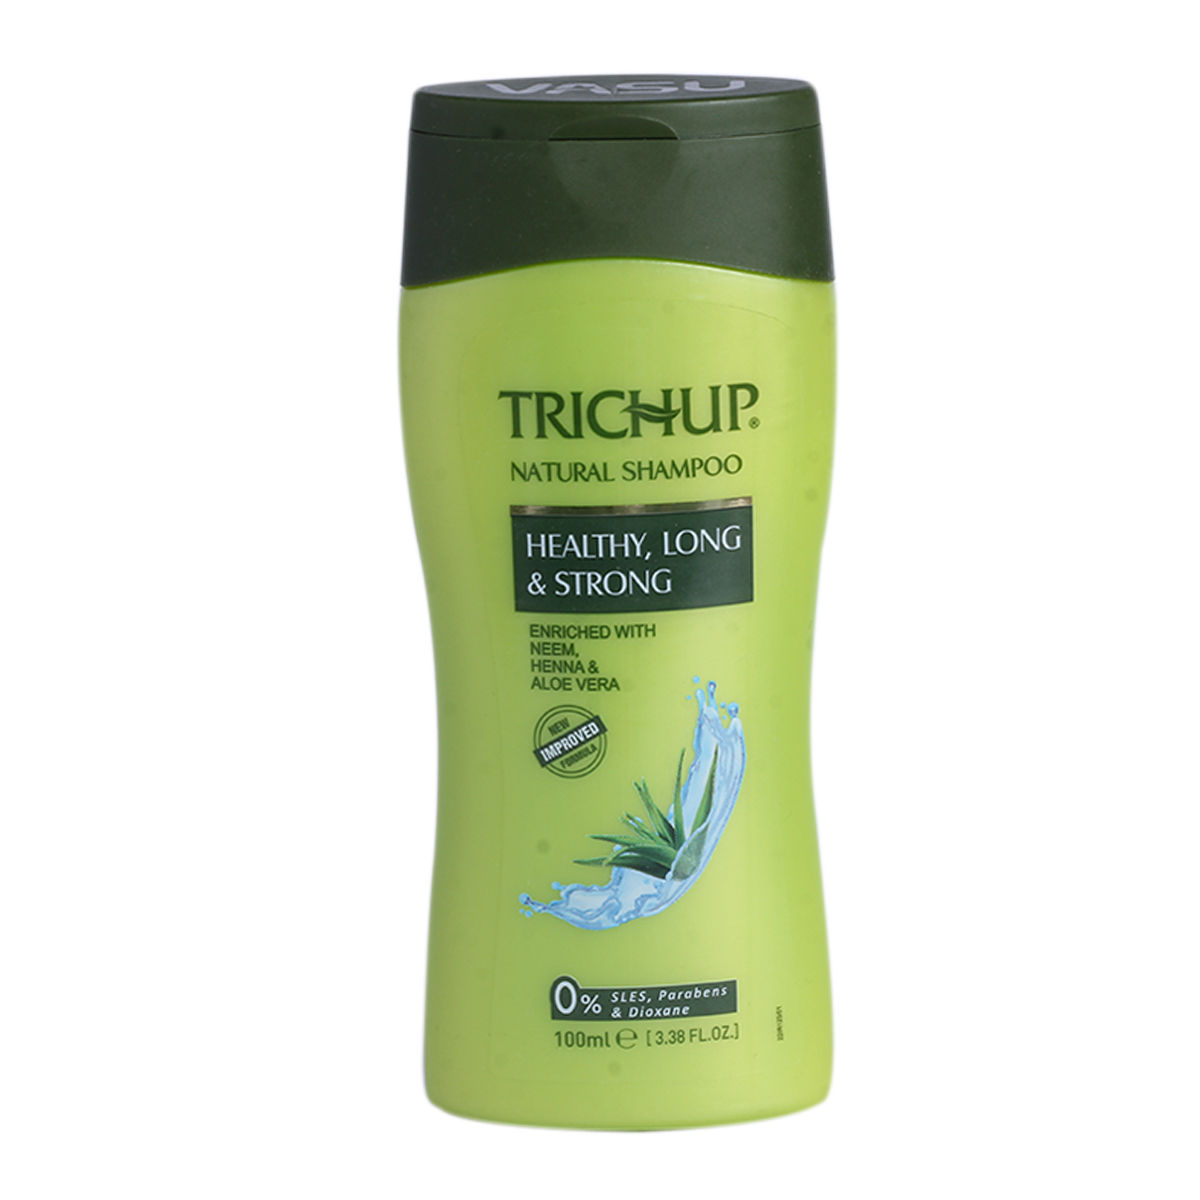 Buy Trichup Healthy Long & Strong Herbal Shampoo, 100 ml Online